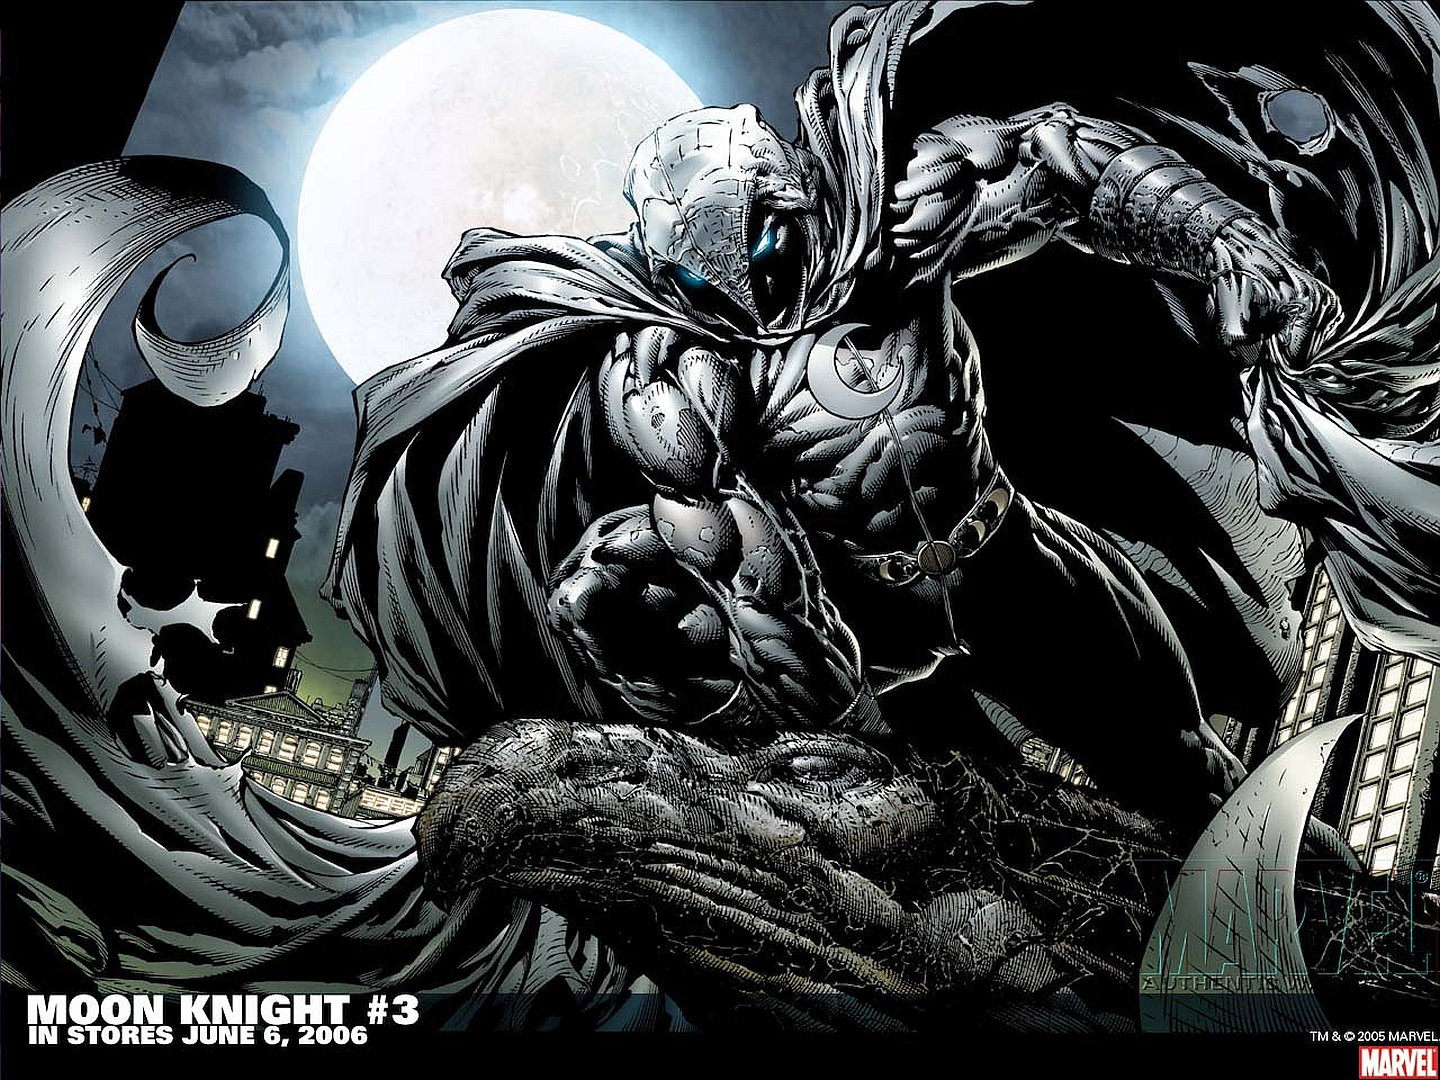 moon knight wallpaper phone • tablet - KAPOW! - comicbook wallpapers